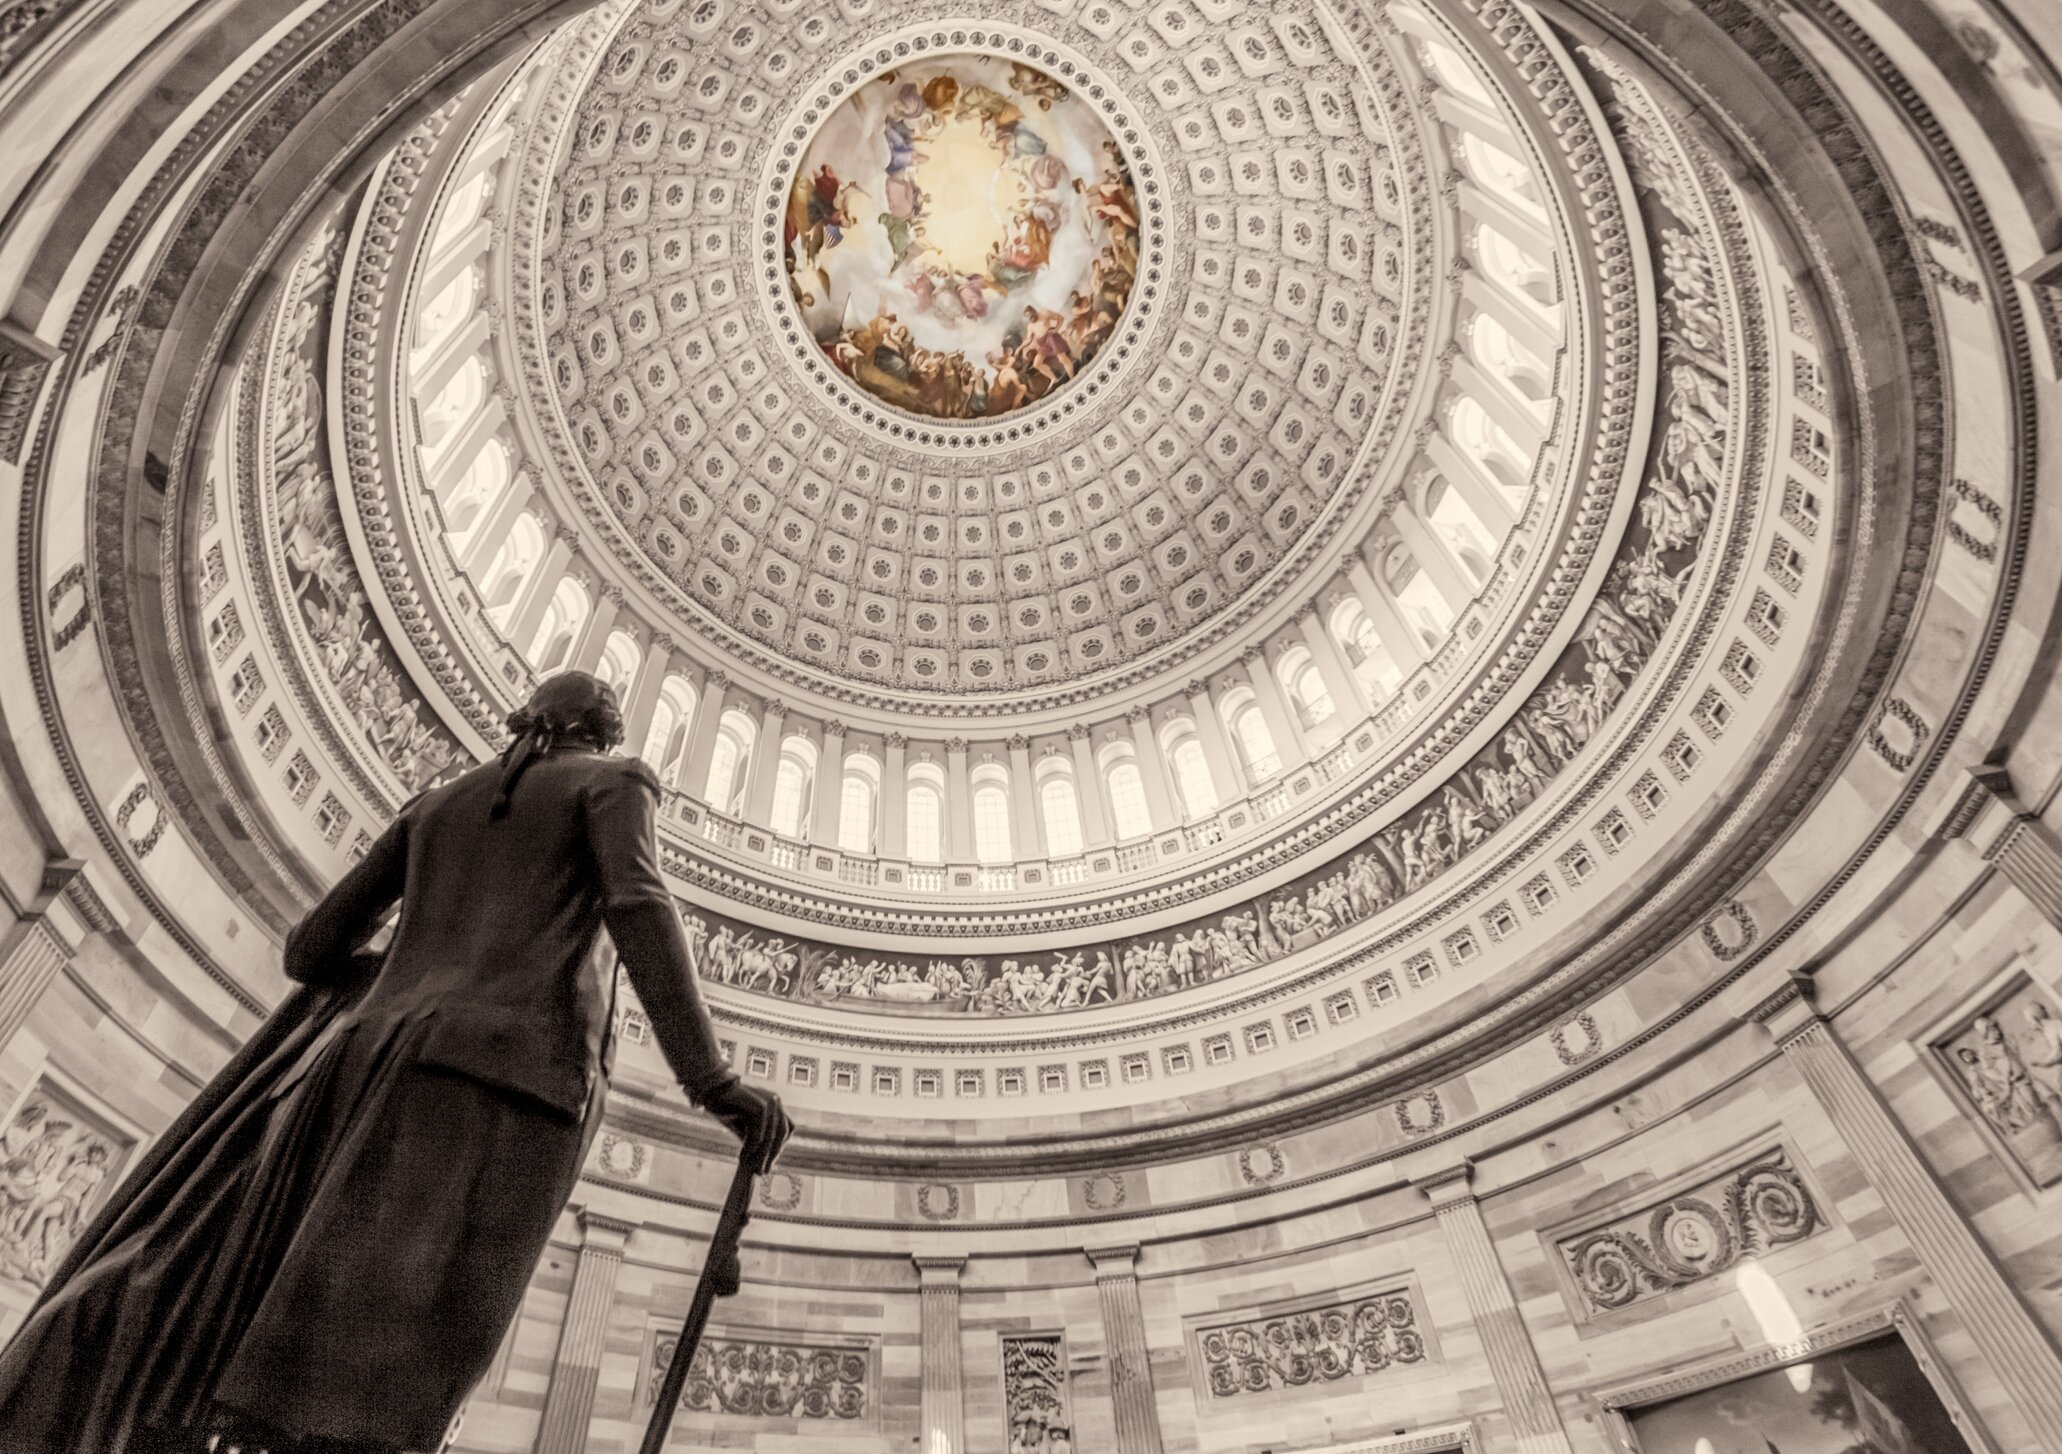 Looking up in the US Capitol rotunda 